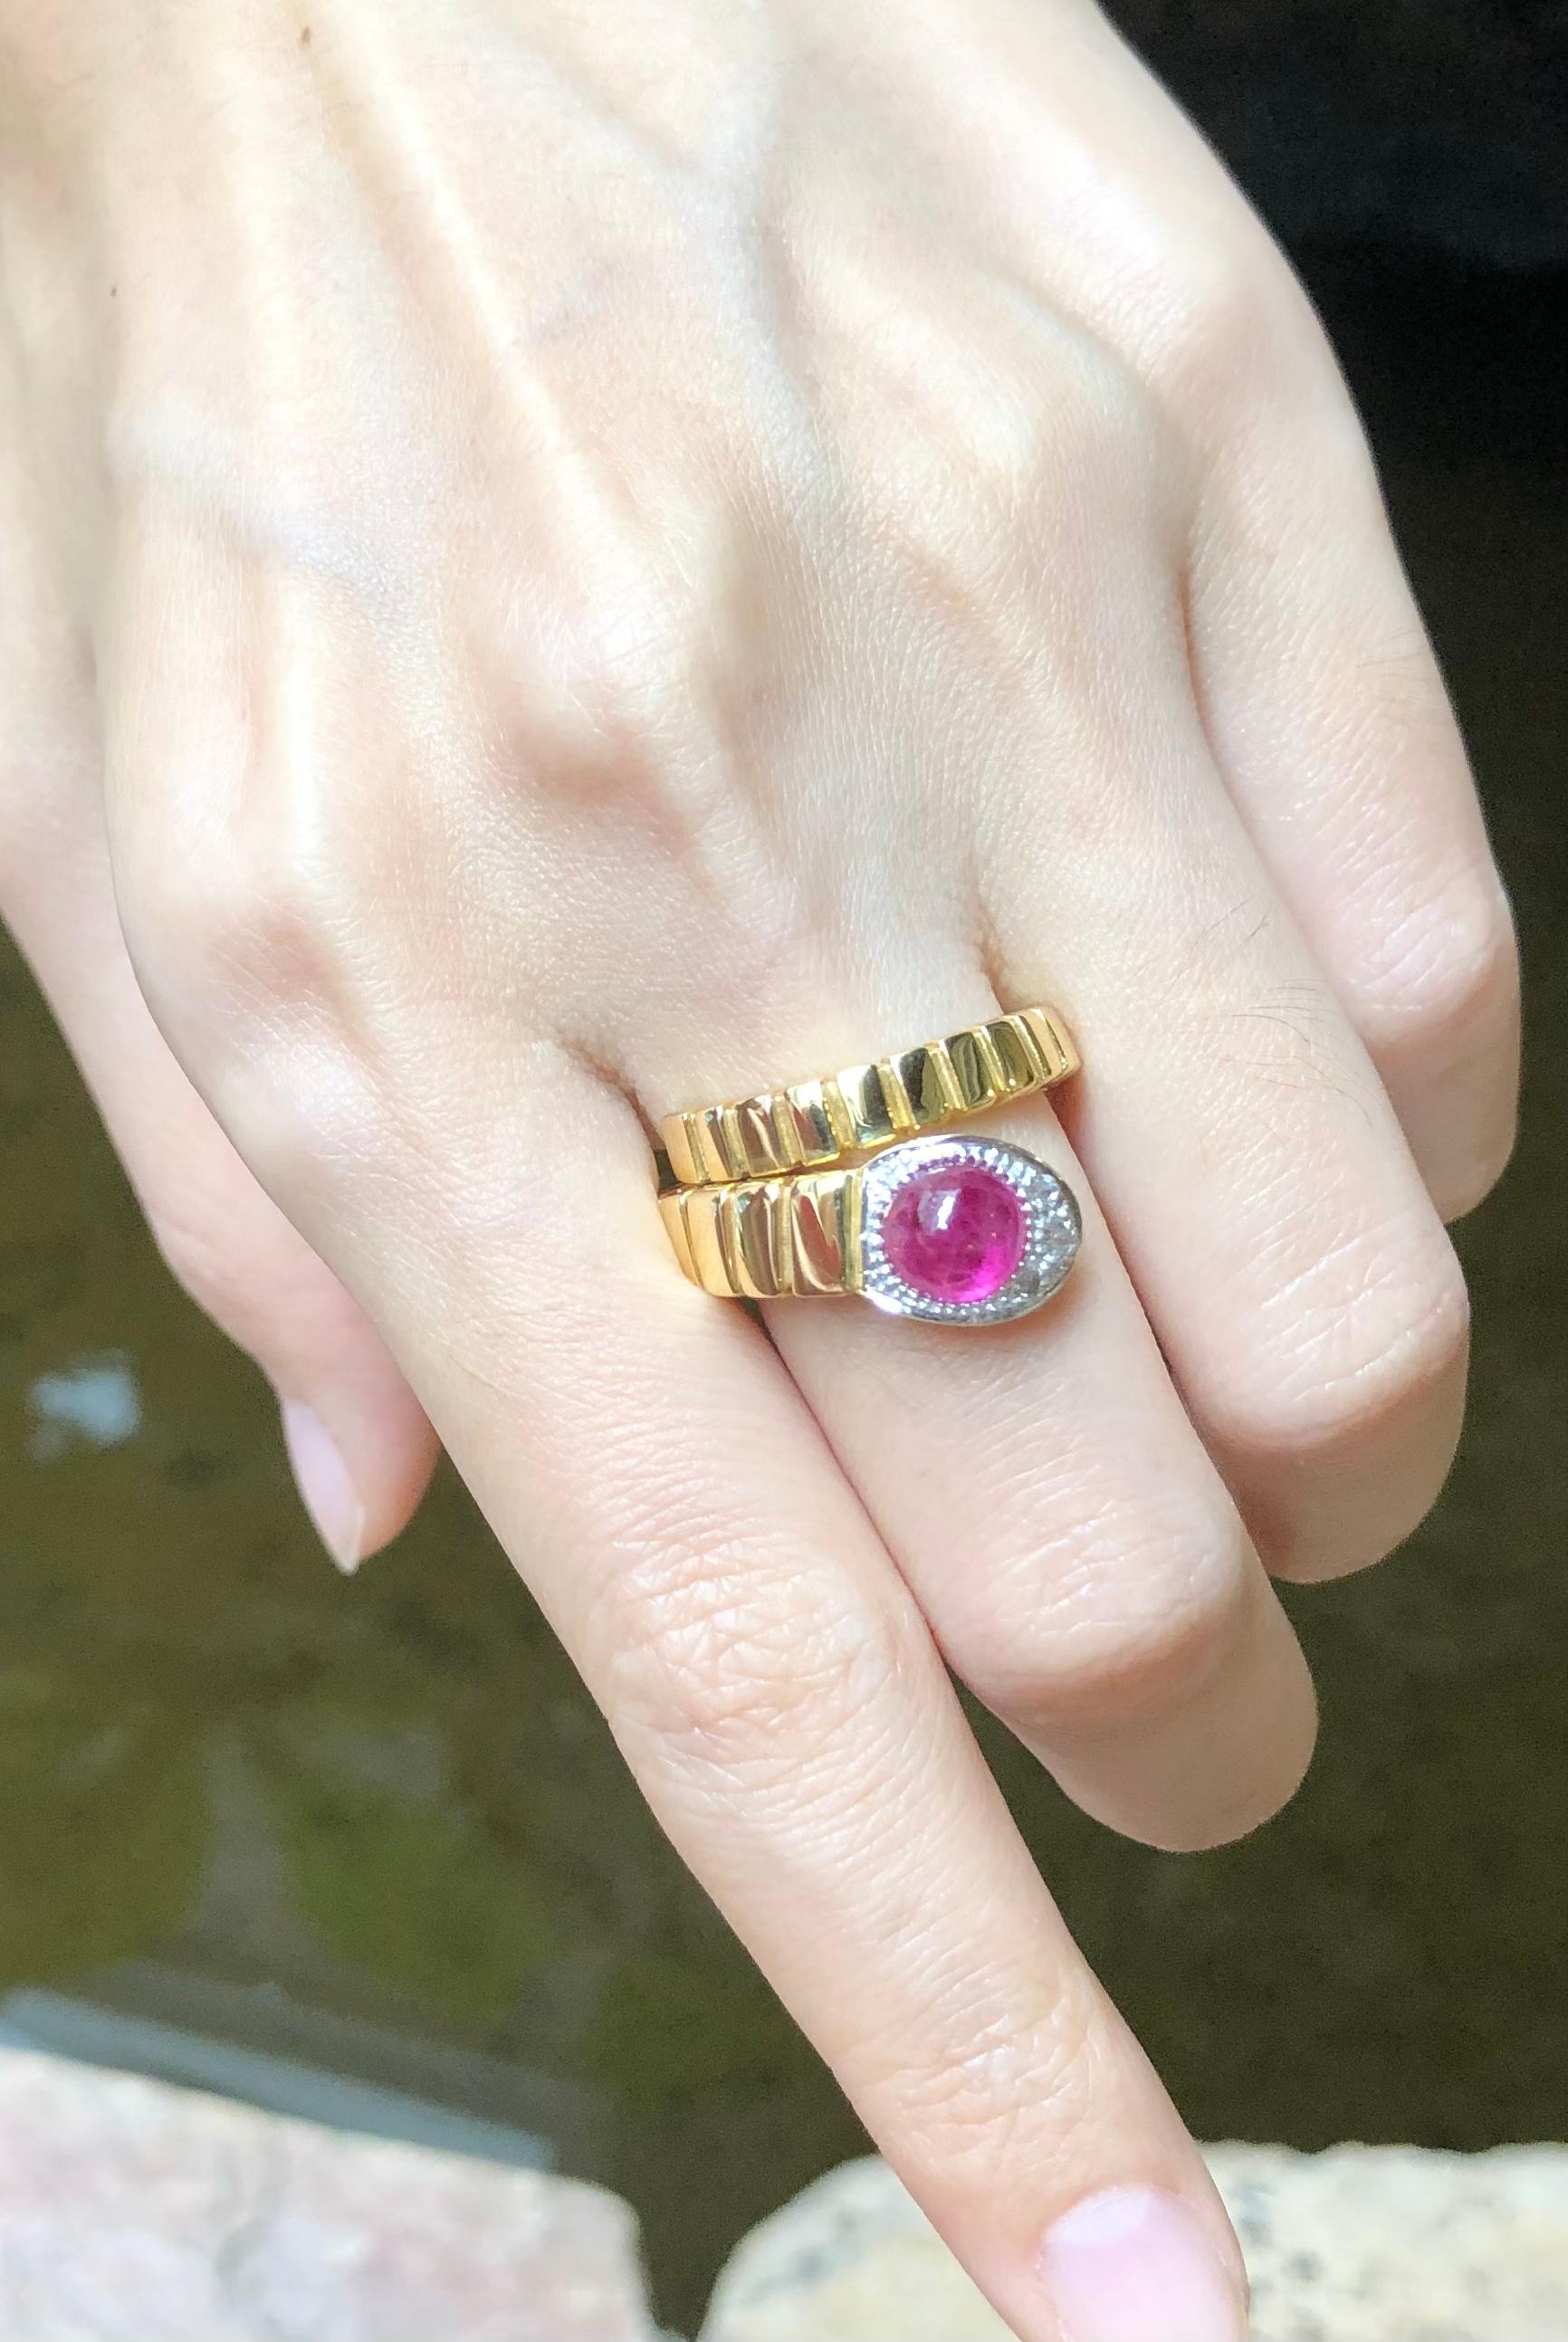 Cabochon Ruby 1.89 carats with Diamond 0.06 carat Ring set in 18 Karat Gold Settings

Width:  2.0 cm 
Length: 1.4 cm
Ring Size: 57
Total Weight: 13.5 grams

